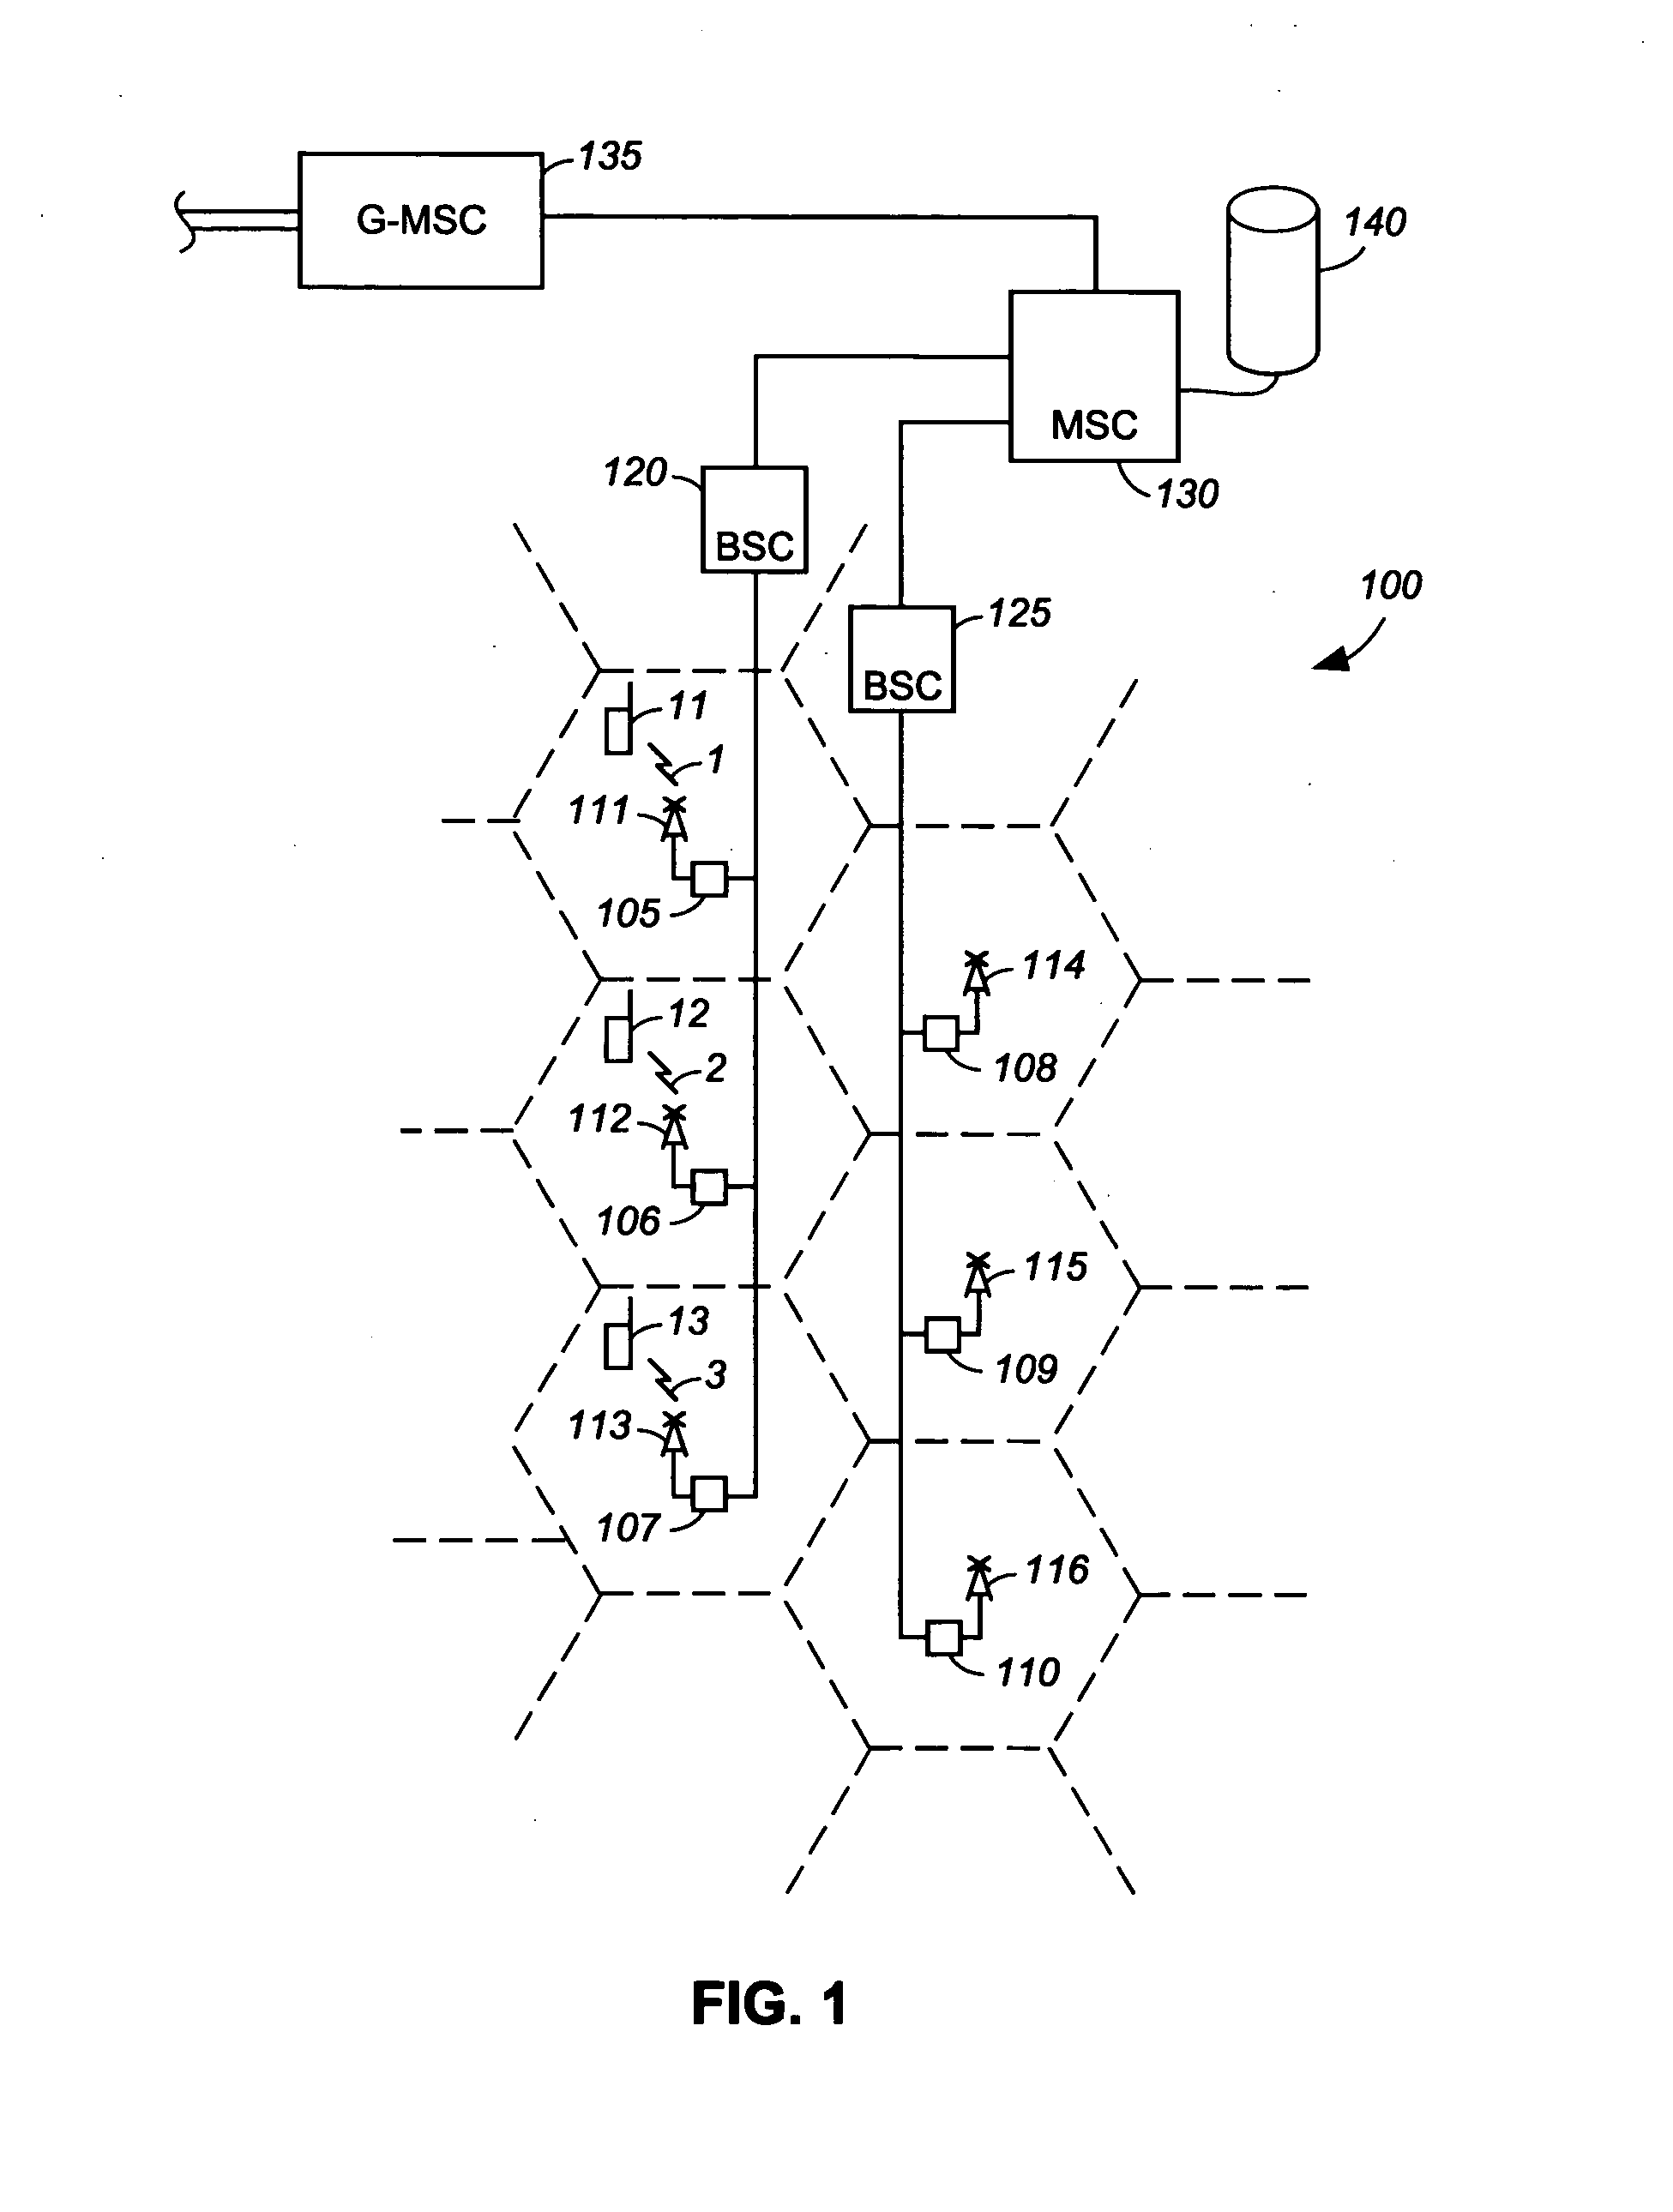 Apparatus and method for improved performance in MC-CDMA radio telecommunication systems that use pulse-shaping filters